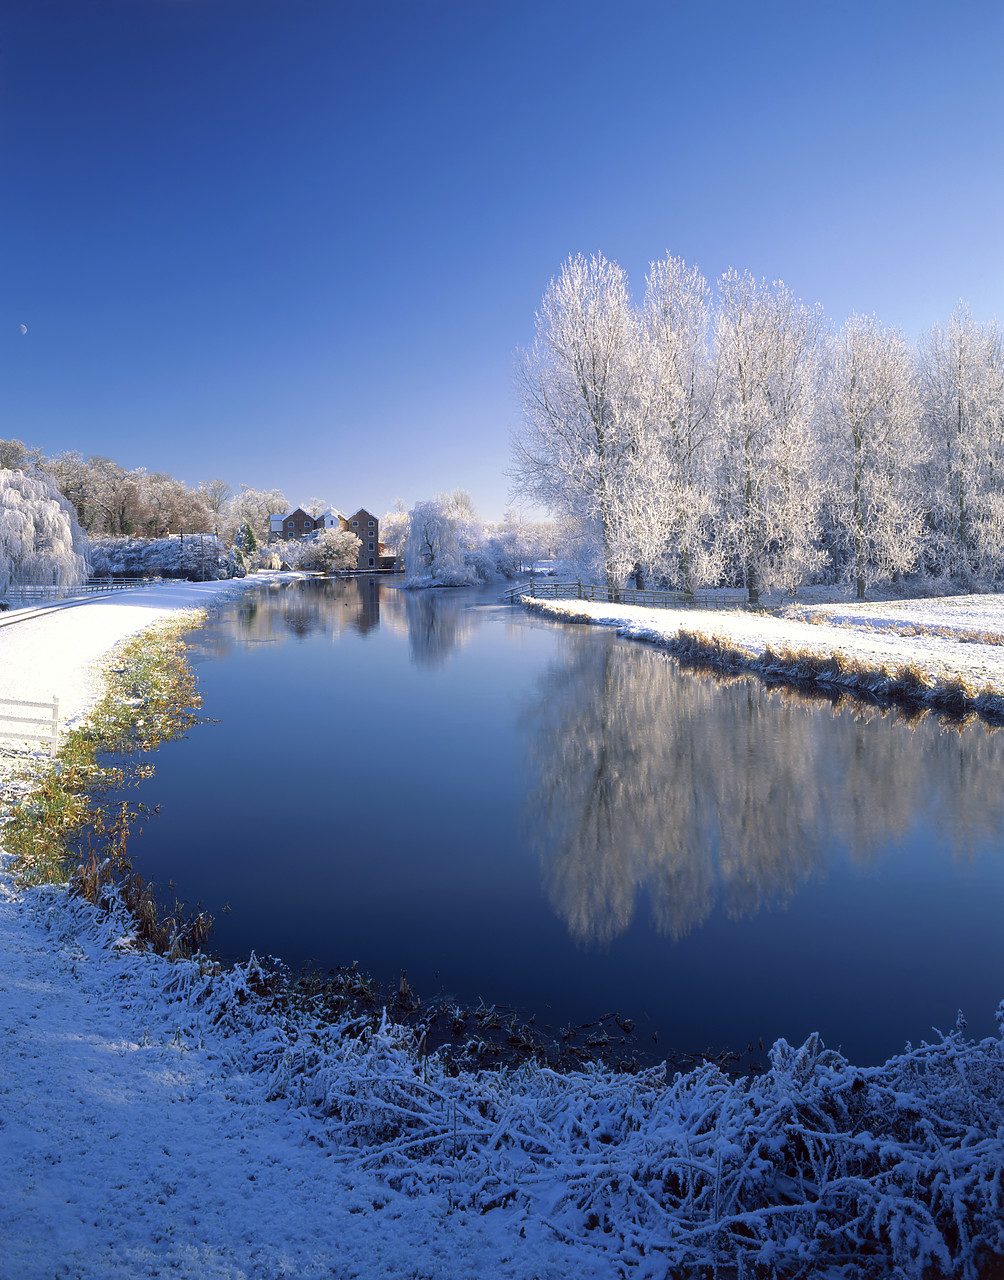 #955888-9 - Oxnead Mill in Frost, River Bure, Norfolk, England